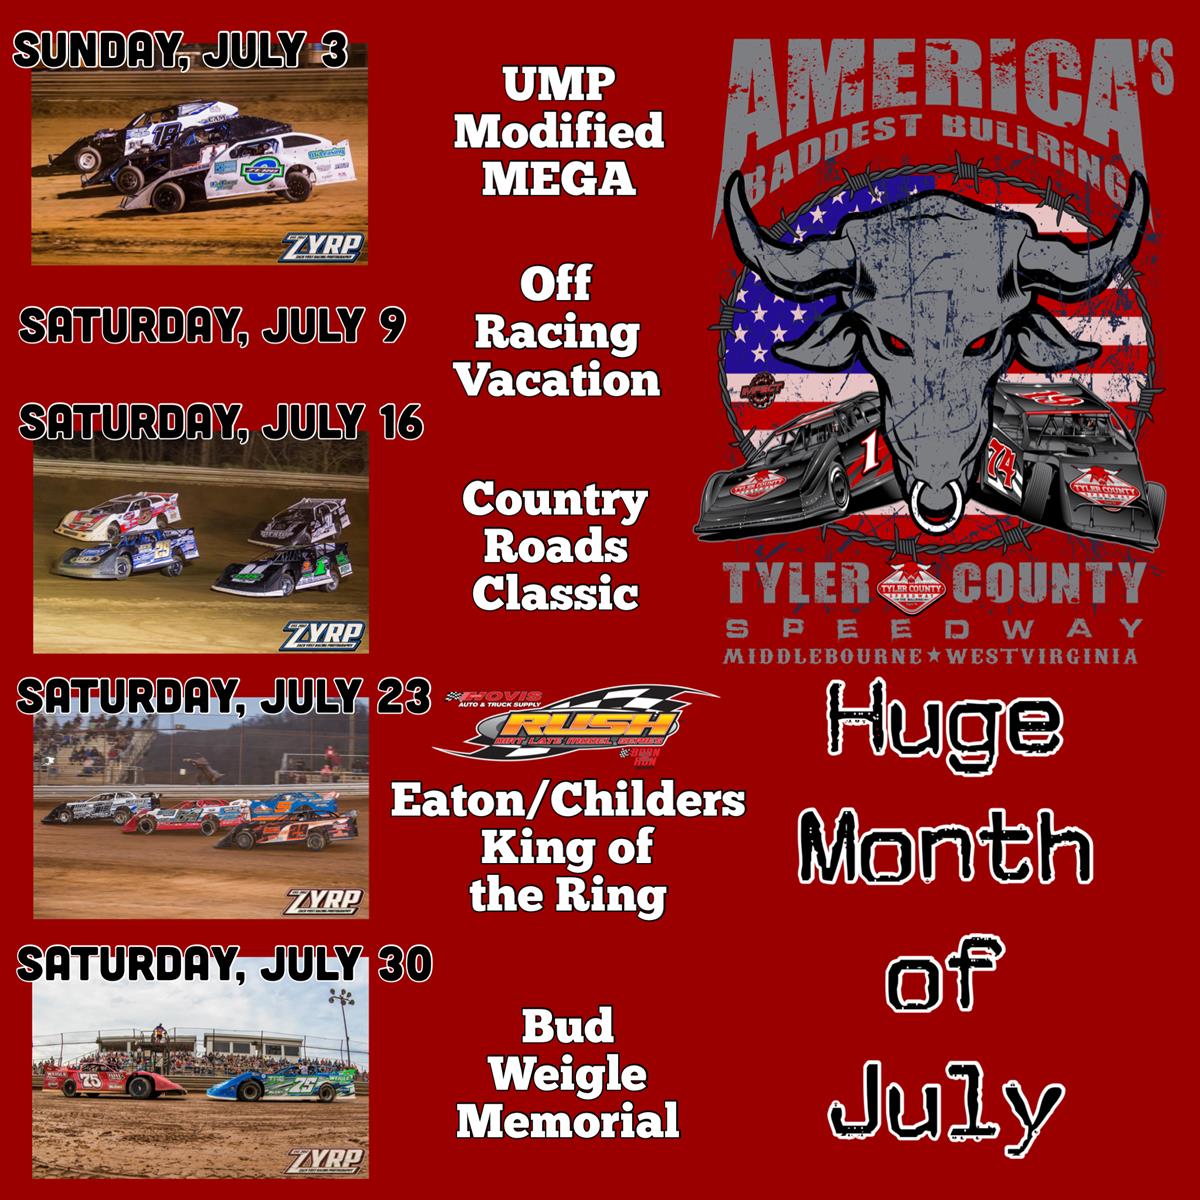 Bullring to Take a Mid-Summer Vacation on Saturday, July 9th; Big Month of July Coming Up at Tyler County Speedway